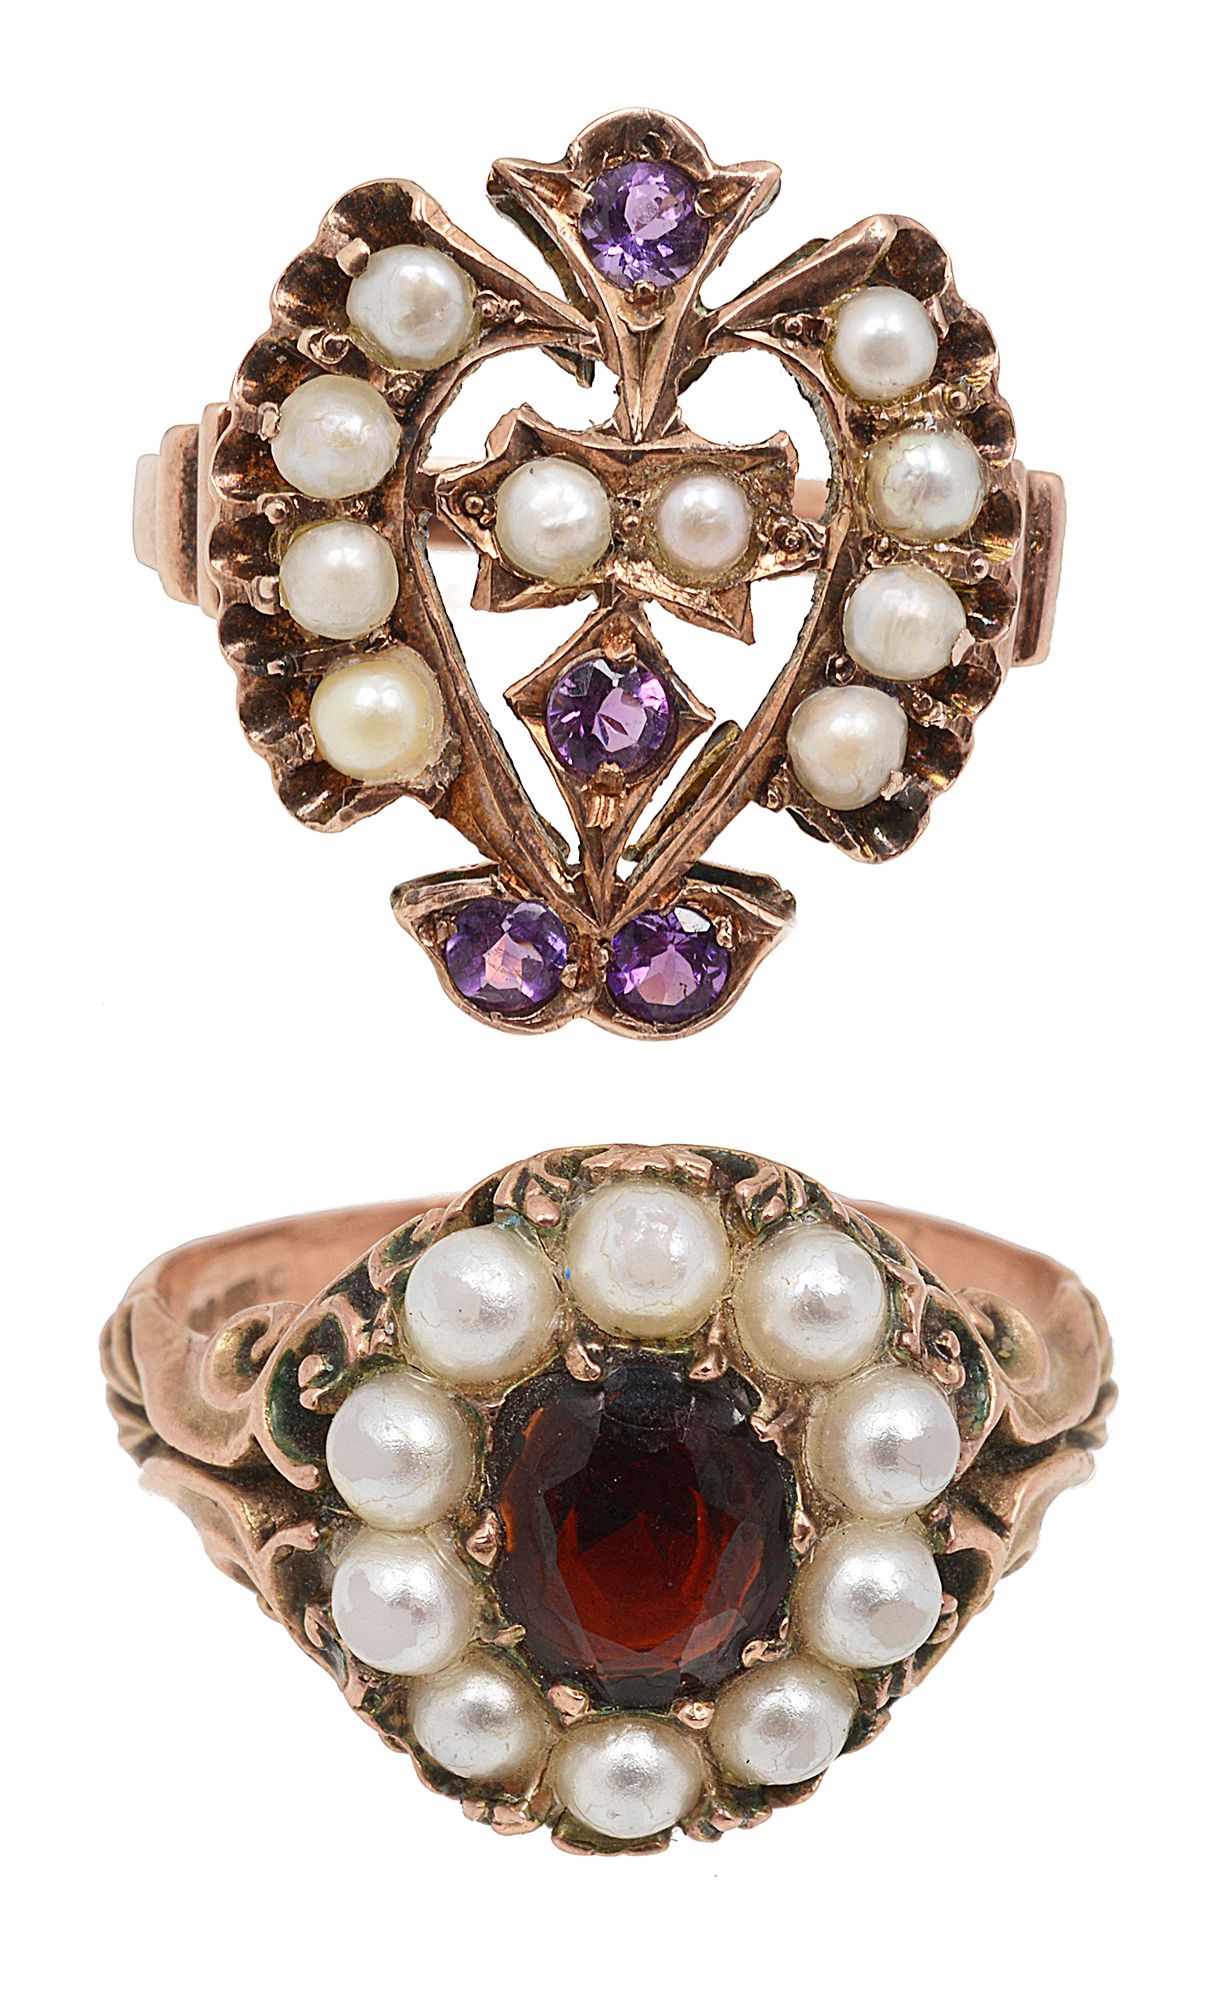 An amethyst and half pearl ring